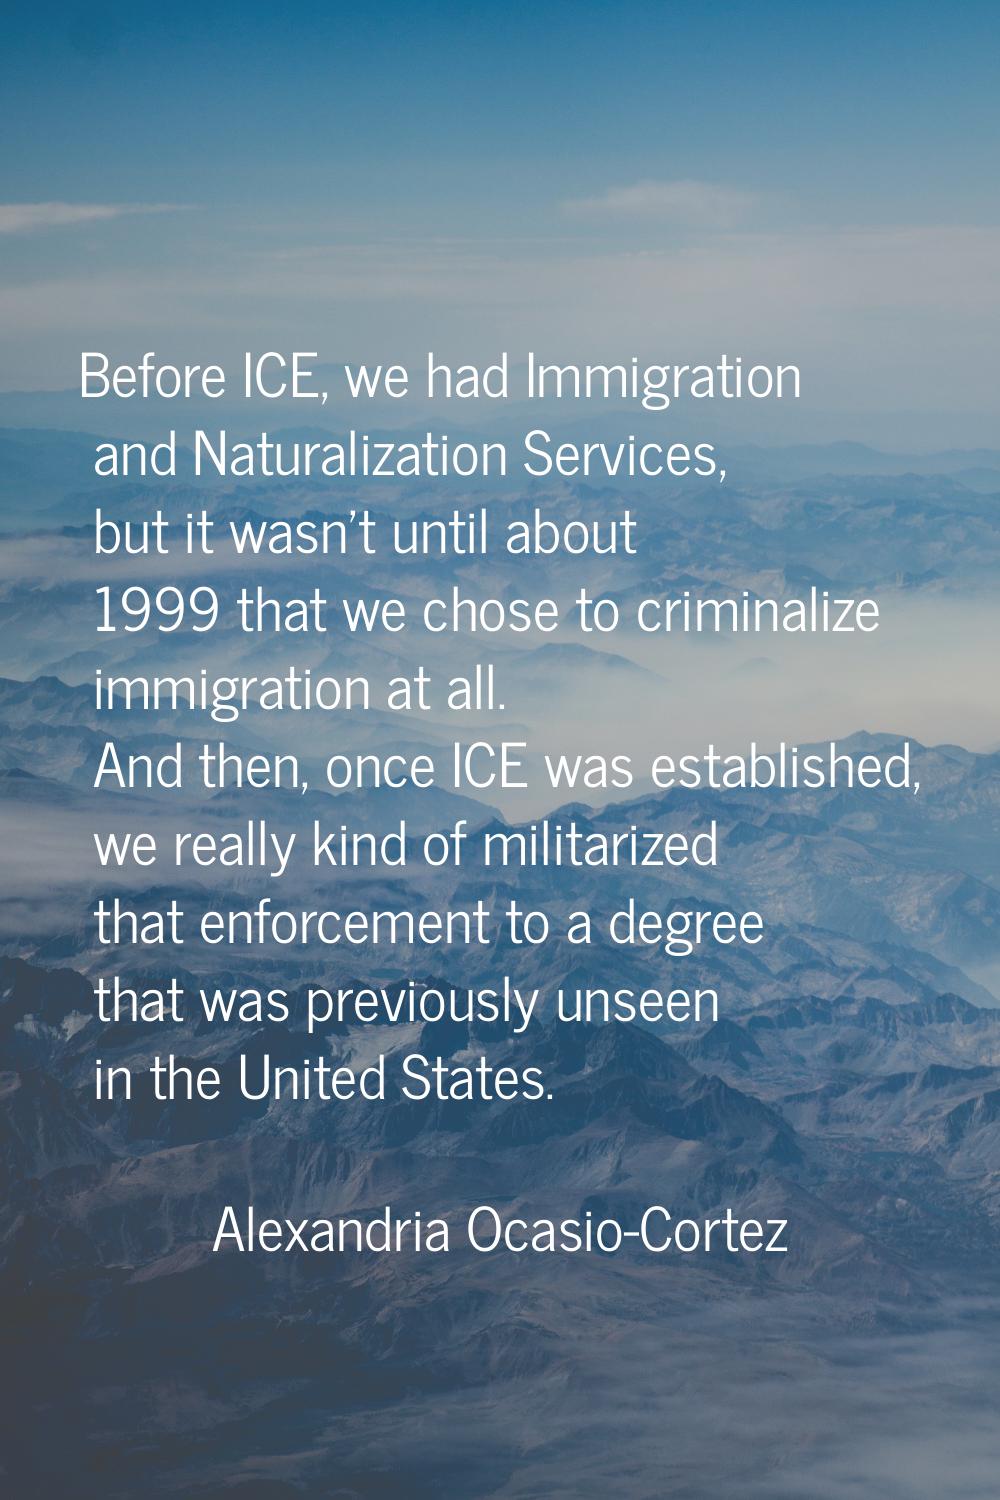 Before ICE, we had Immigration and Naturalization Services, but it wasn't until about 1999 that we 